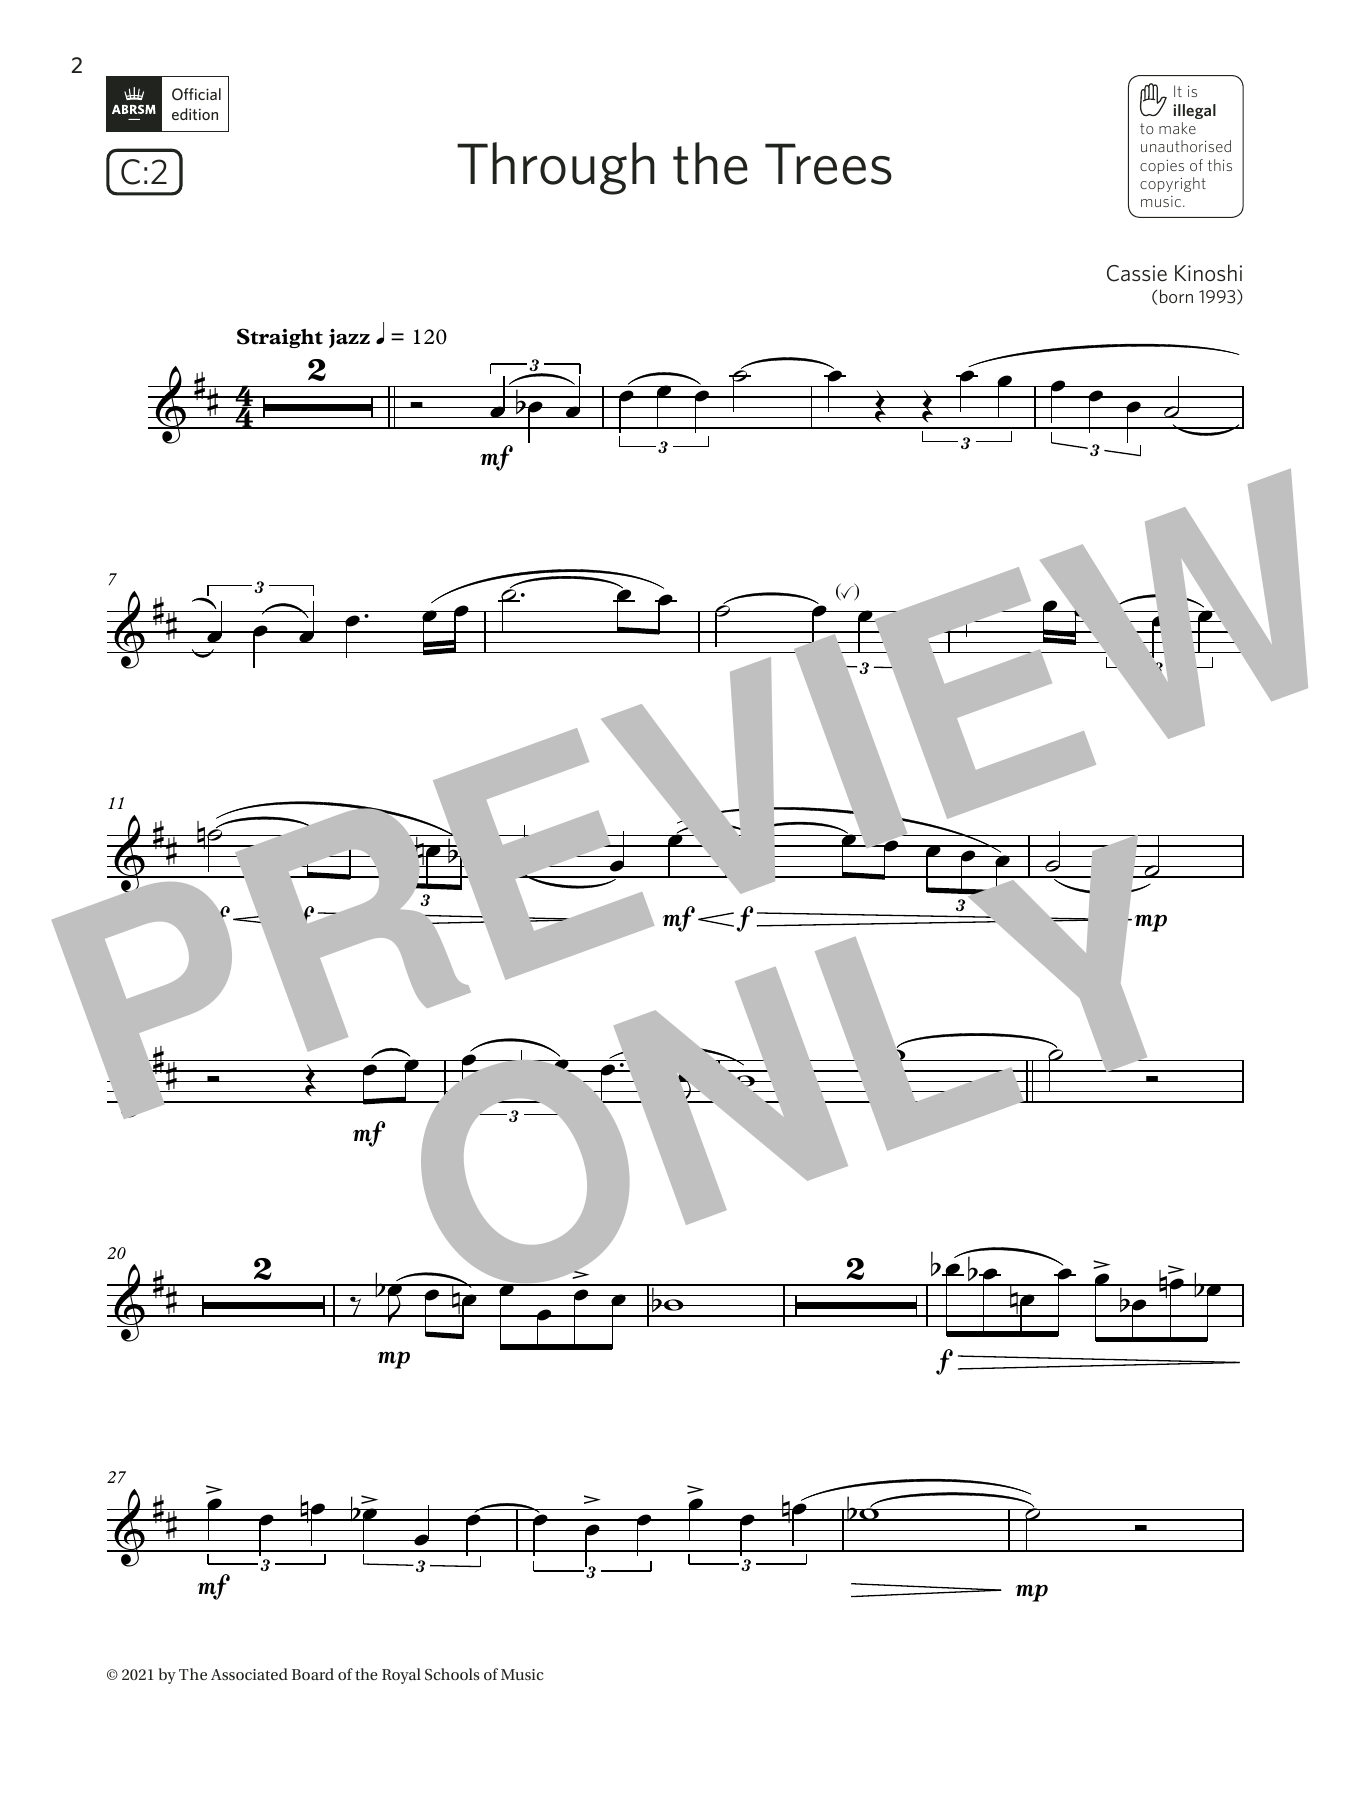 Download Cassie Kinoshi Through the Trees (Grade 5 List C2 from Sheet Music